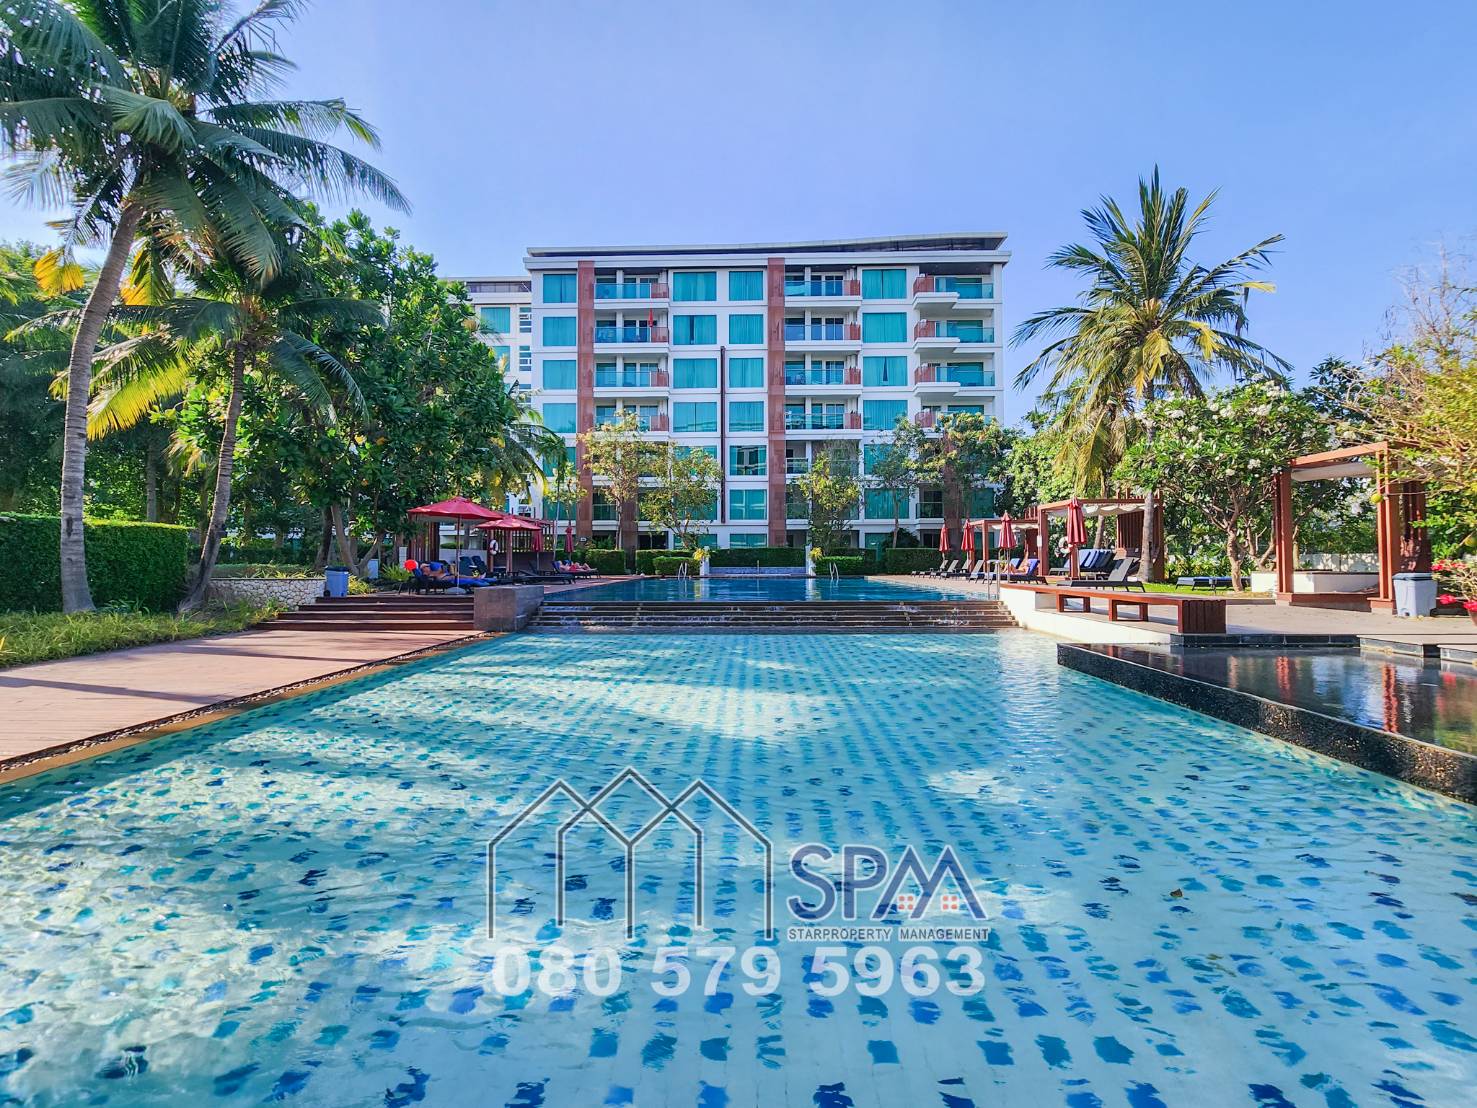 Condominium for sale at Huahin, Hot Deal 2 bedrooms unit at Amari Residence Huahin for sale, price 12.5 Million Baht